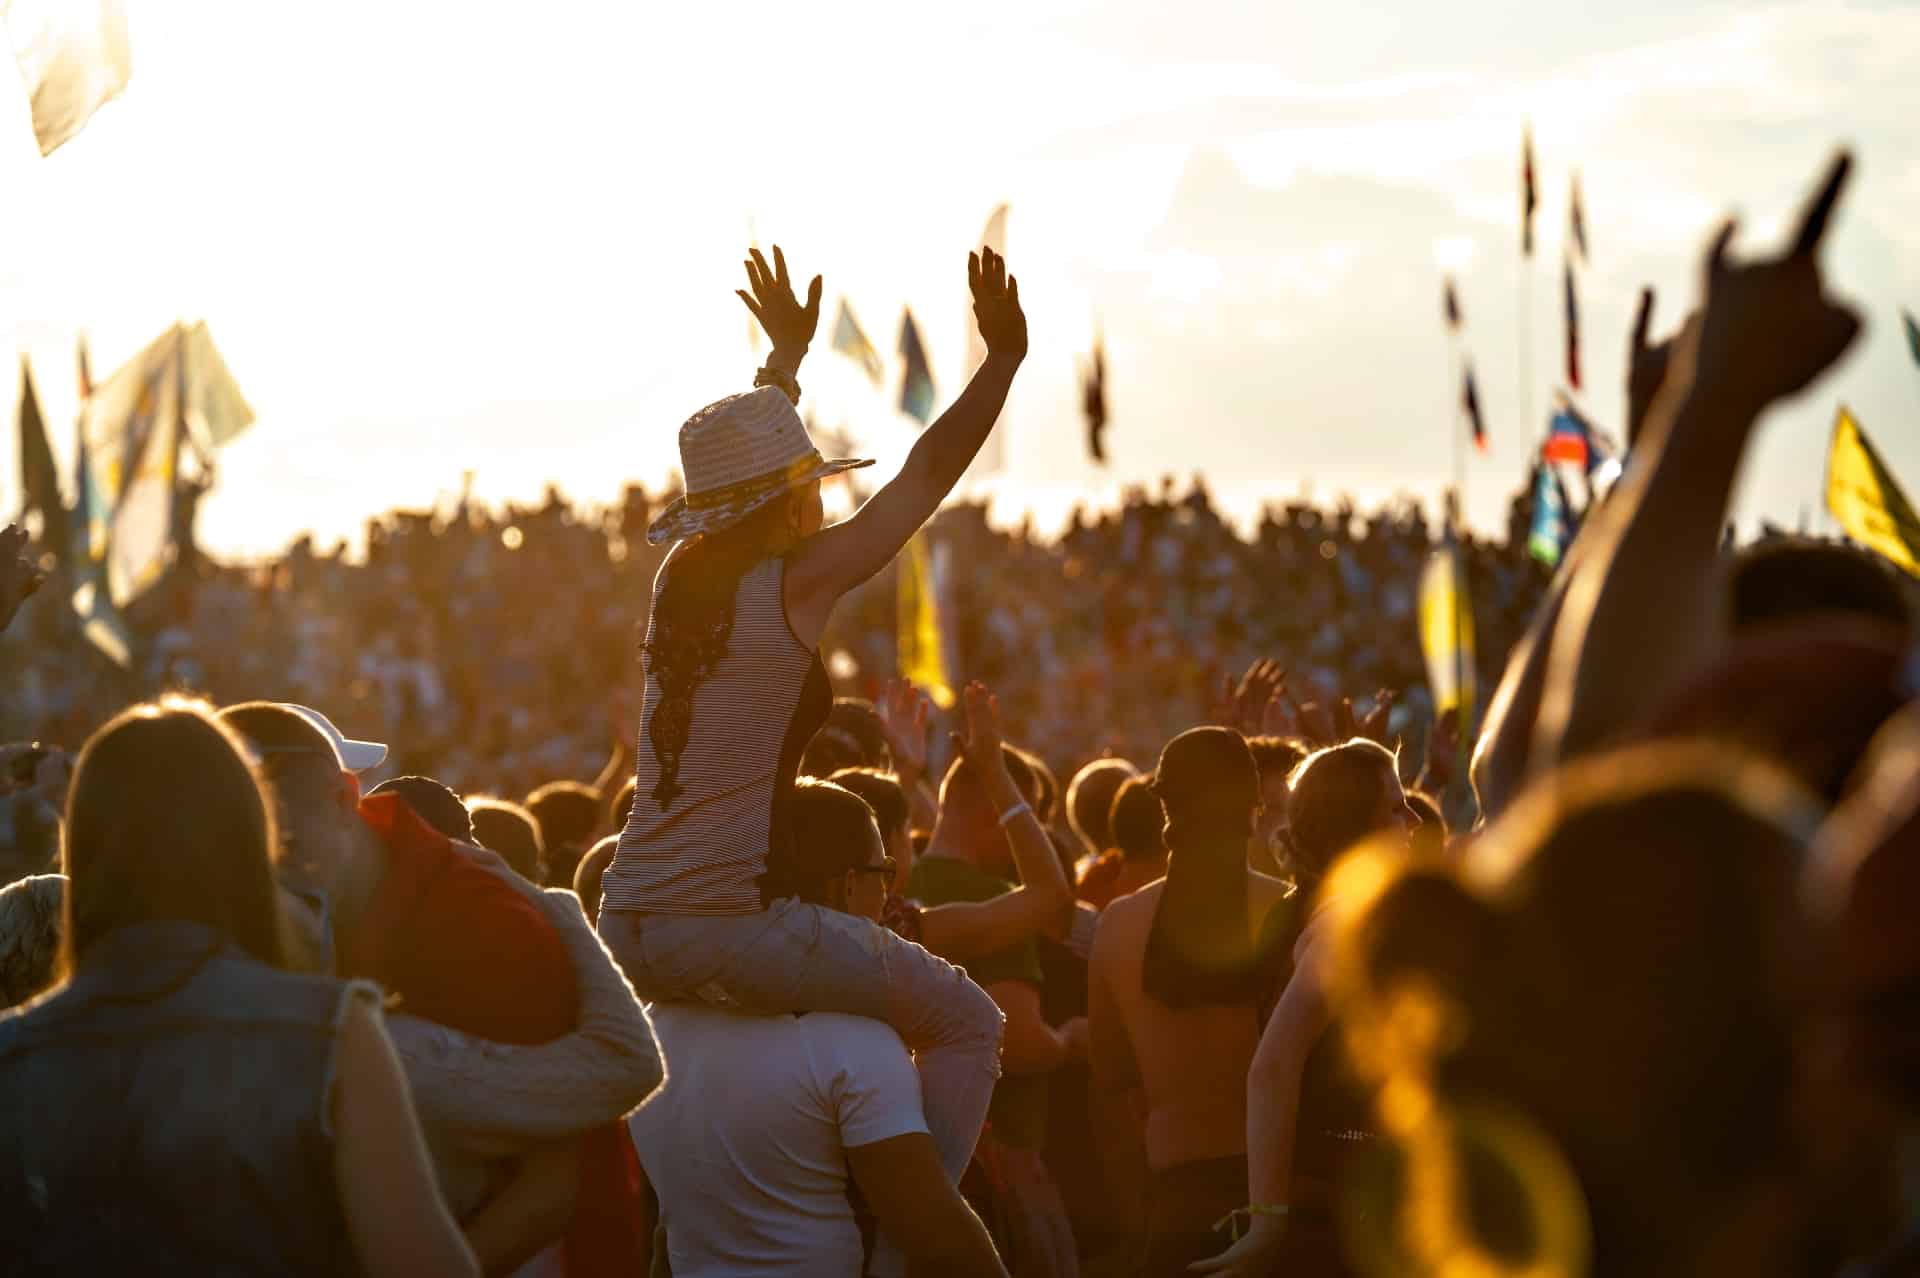 Purity - 5 examples of brand engagement at music festivals